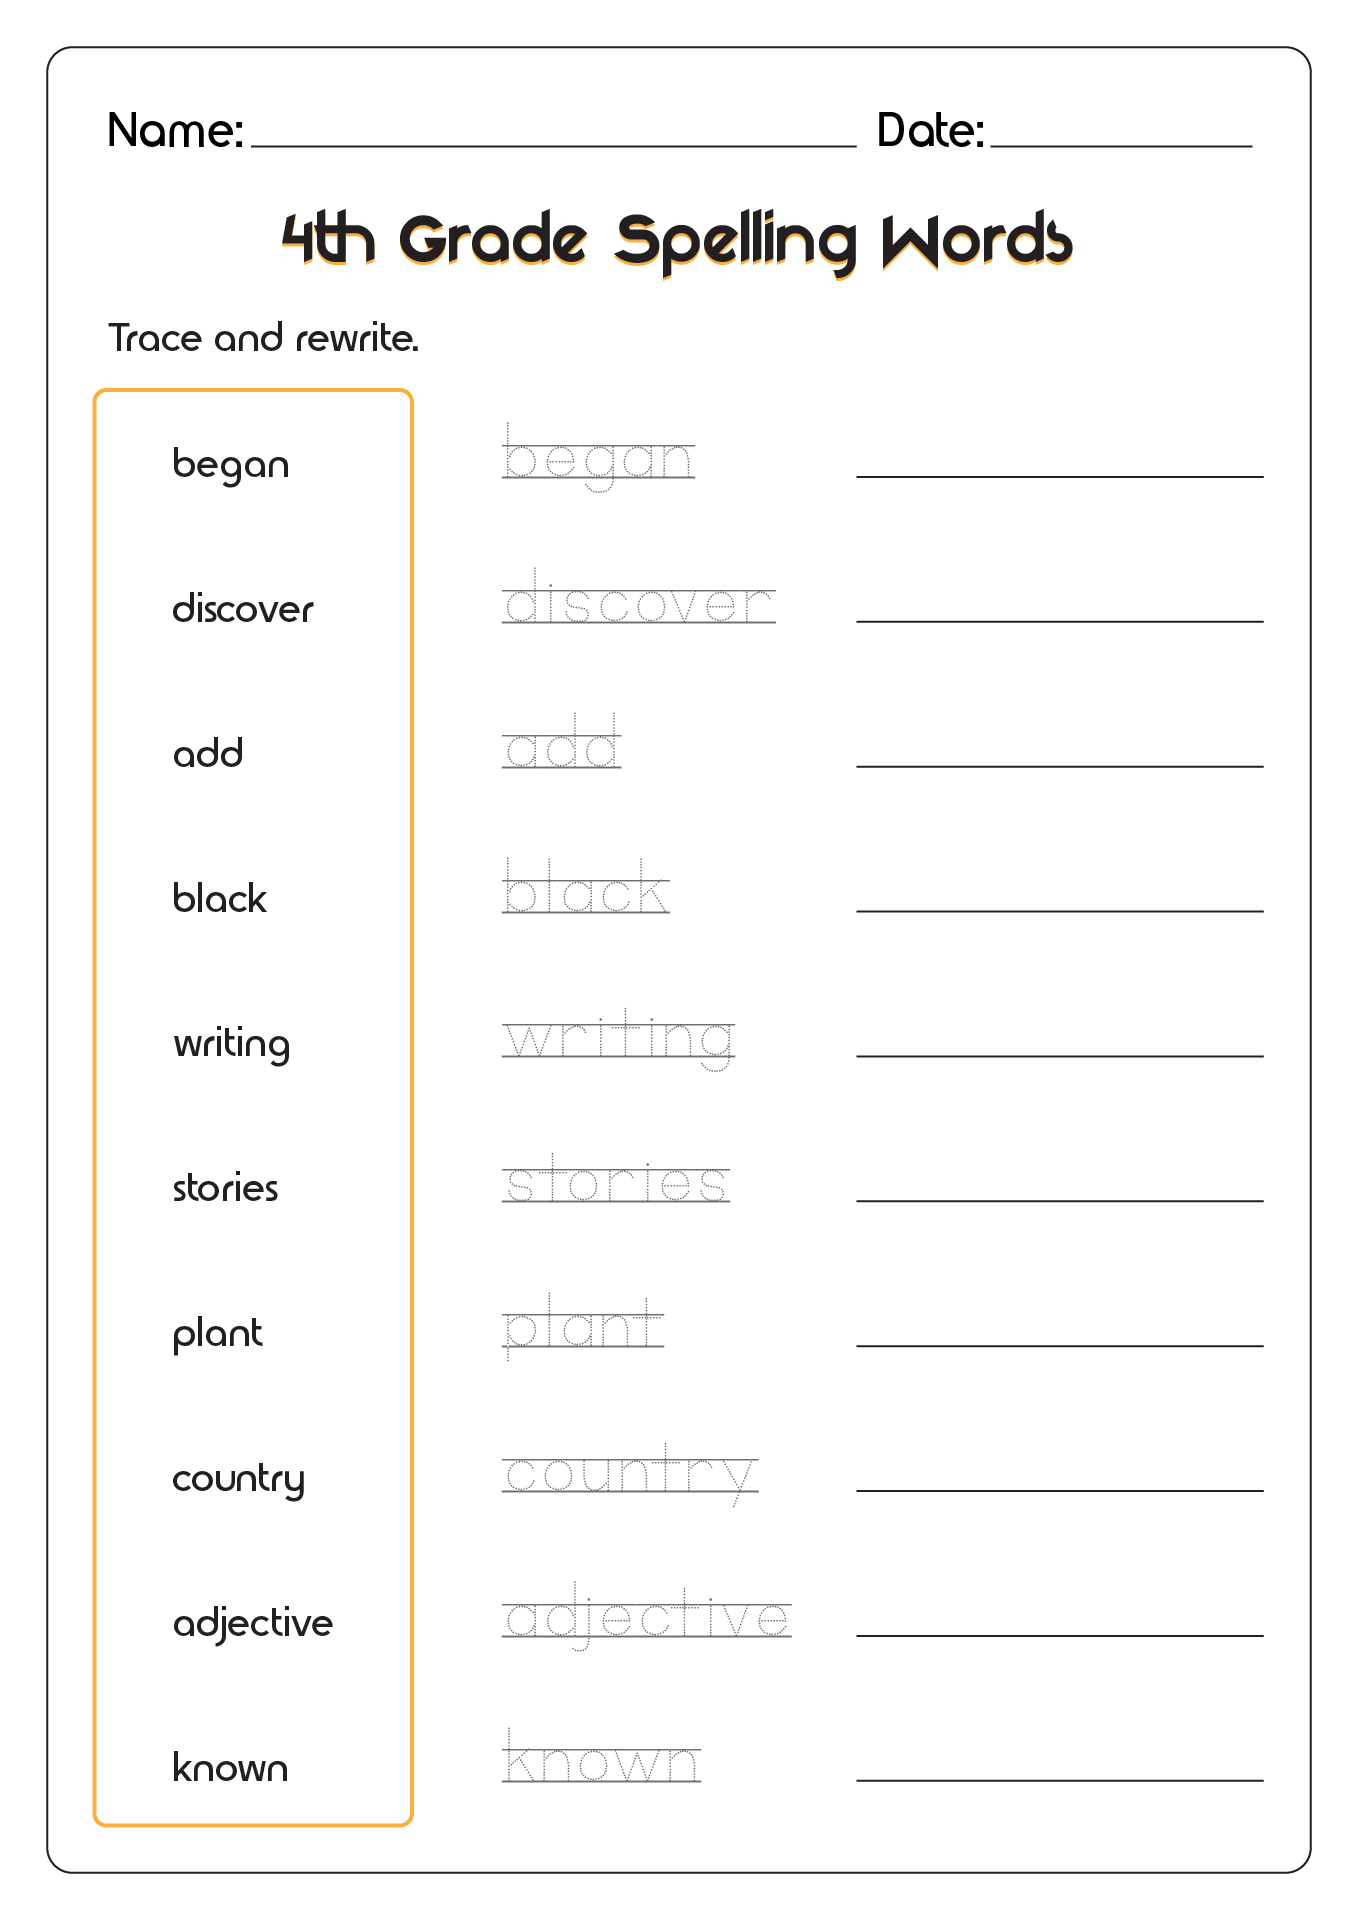 4th-grade-spelling-words-list-printable-explore-all-best-results